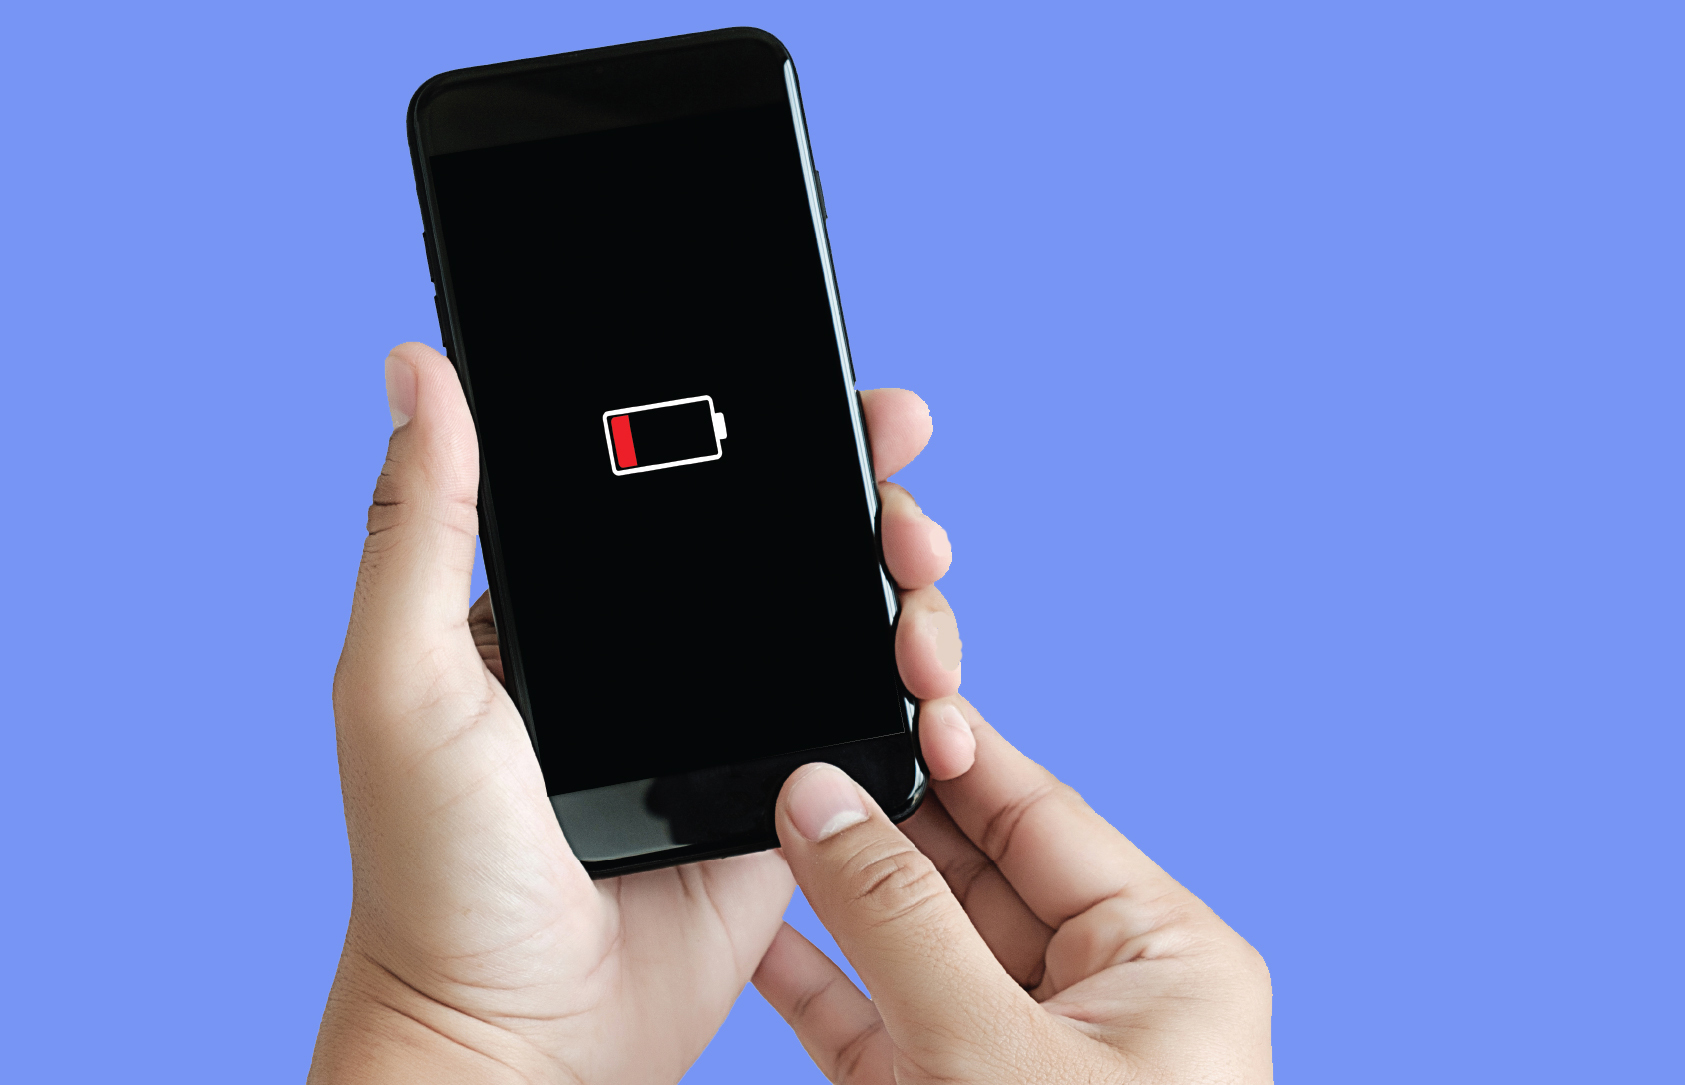 There’s no need to panic when your phone’s battery drops into the red.